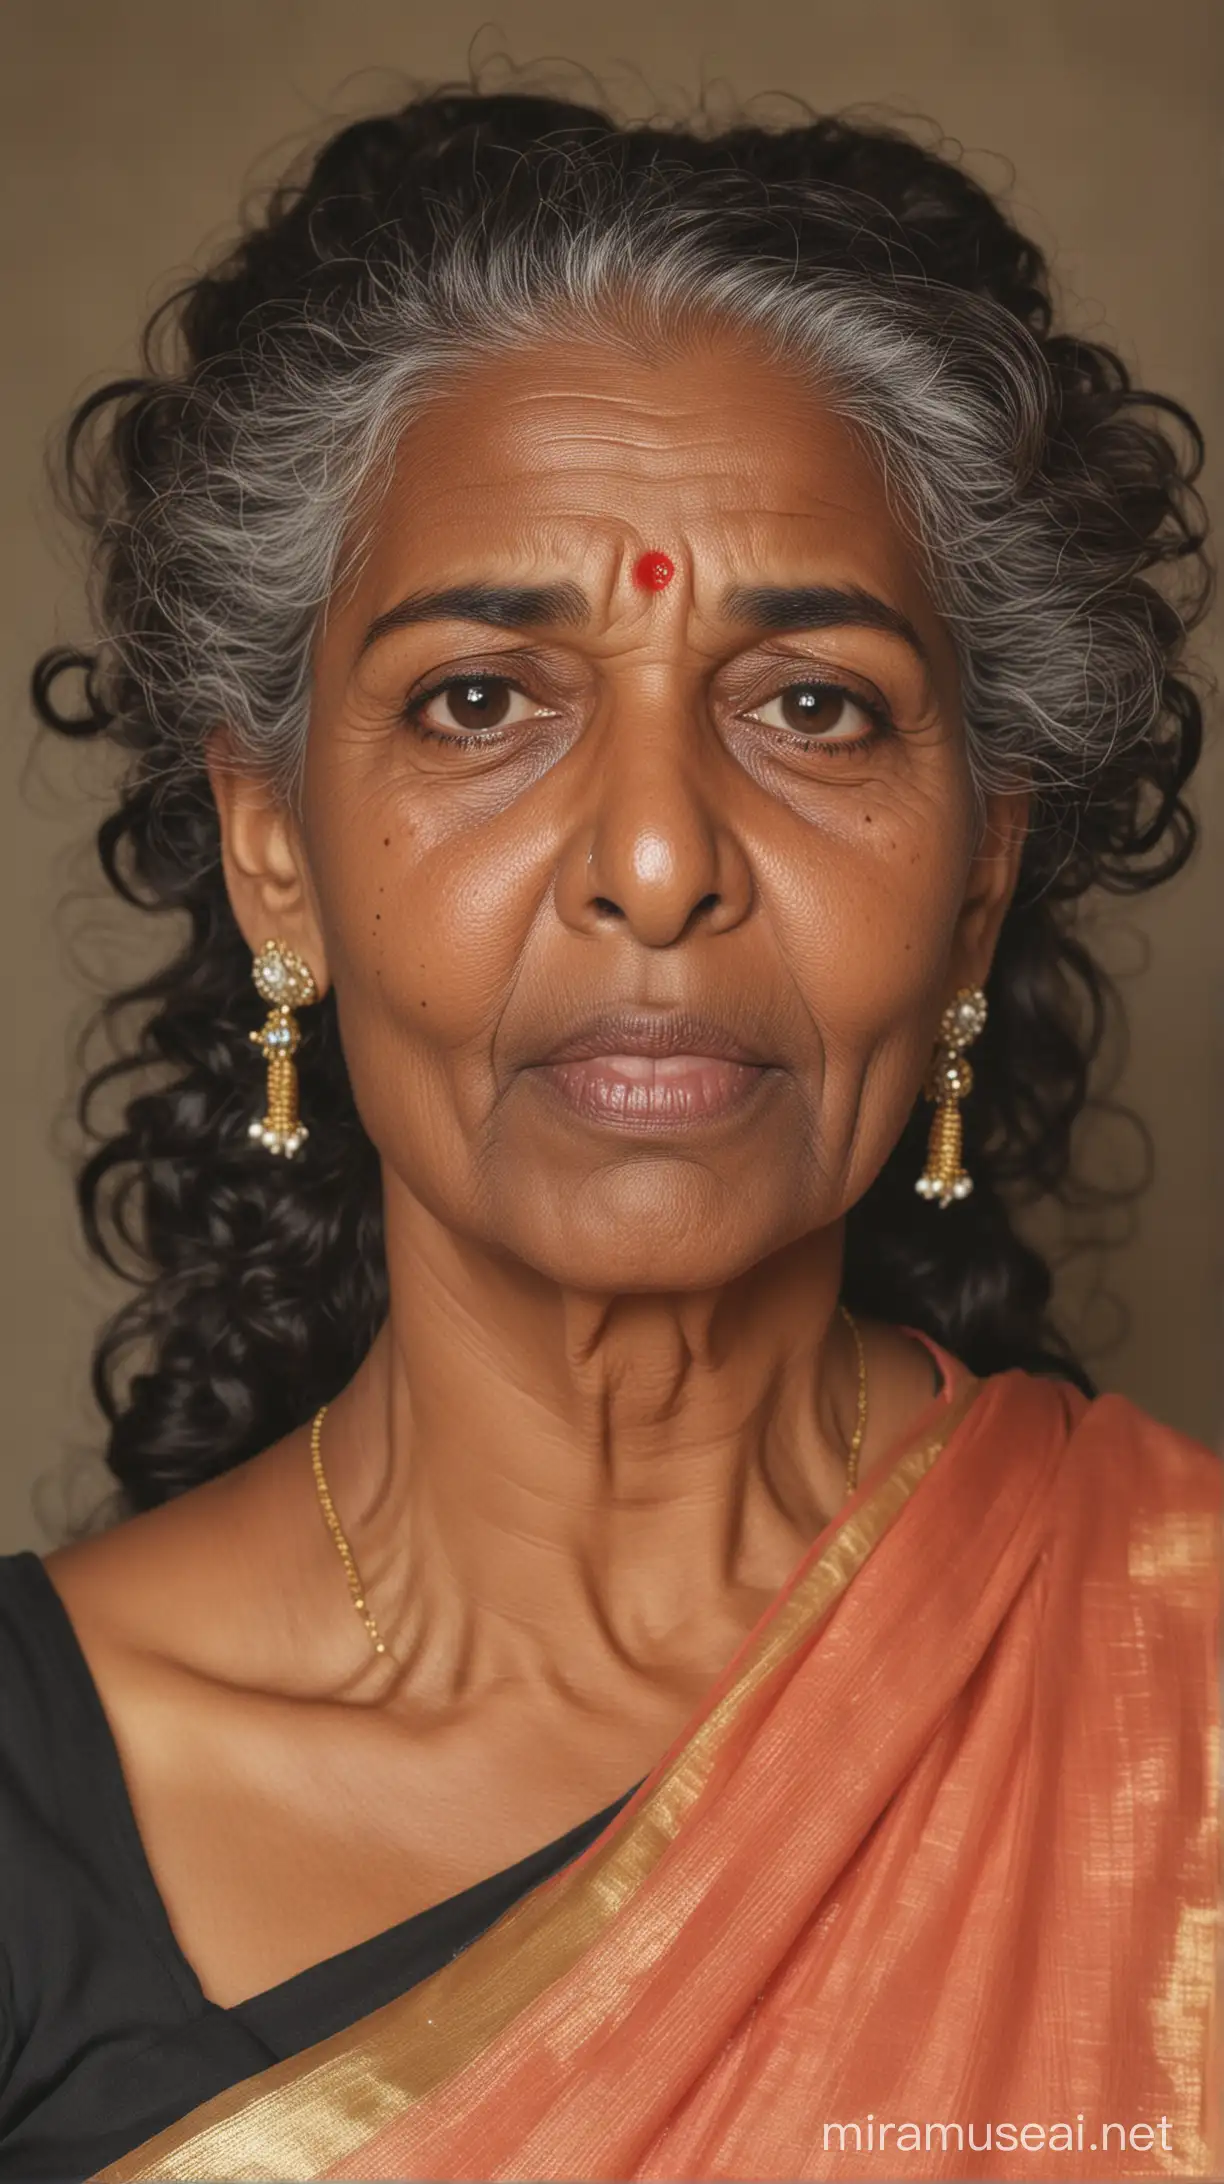 A 88 year old black fat woman with small eyes, small nose, weak chin, wide lips and long curly hair with a bun at back wearing a Saree